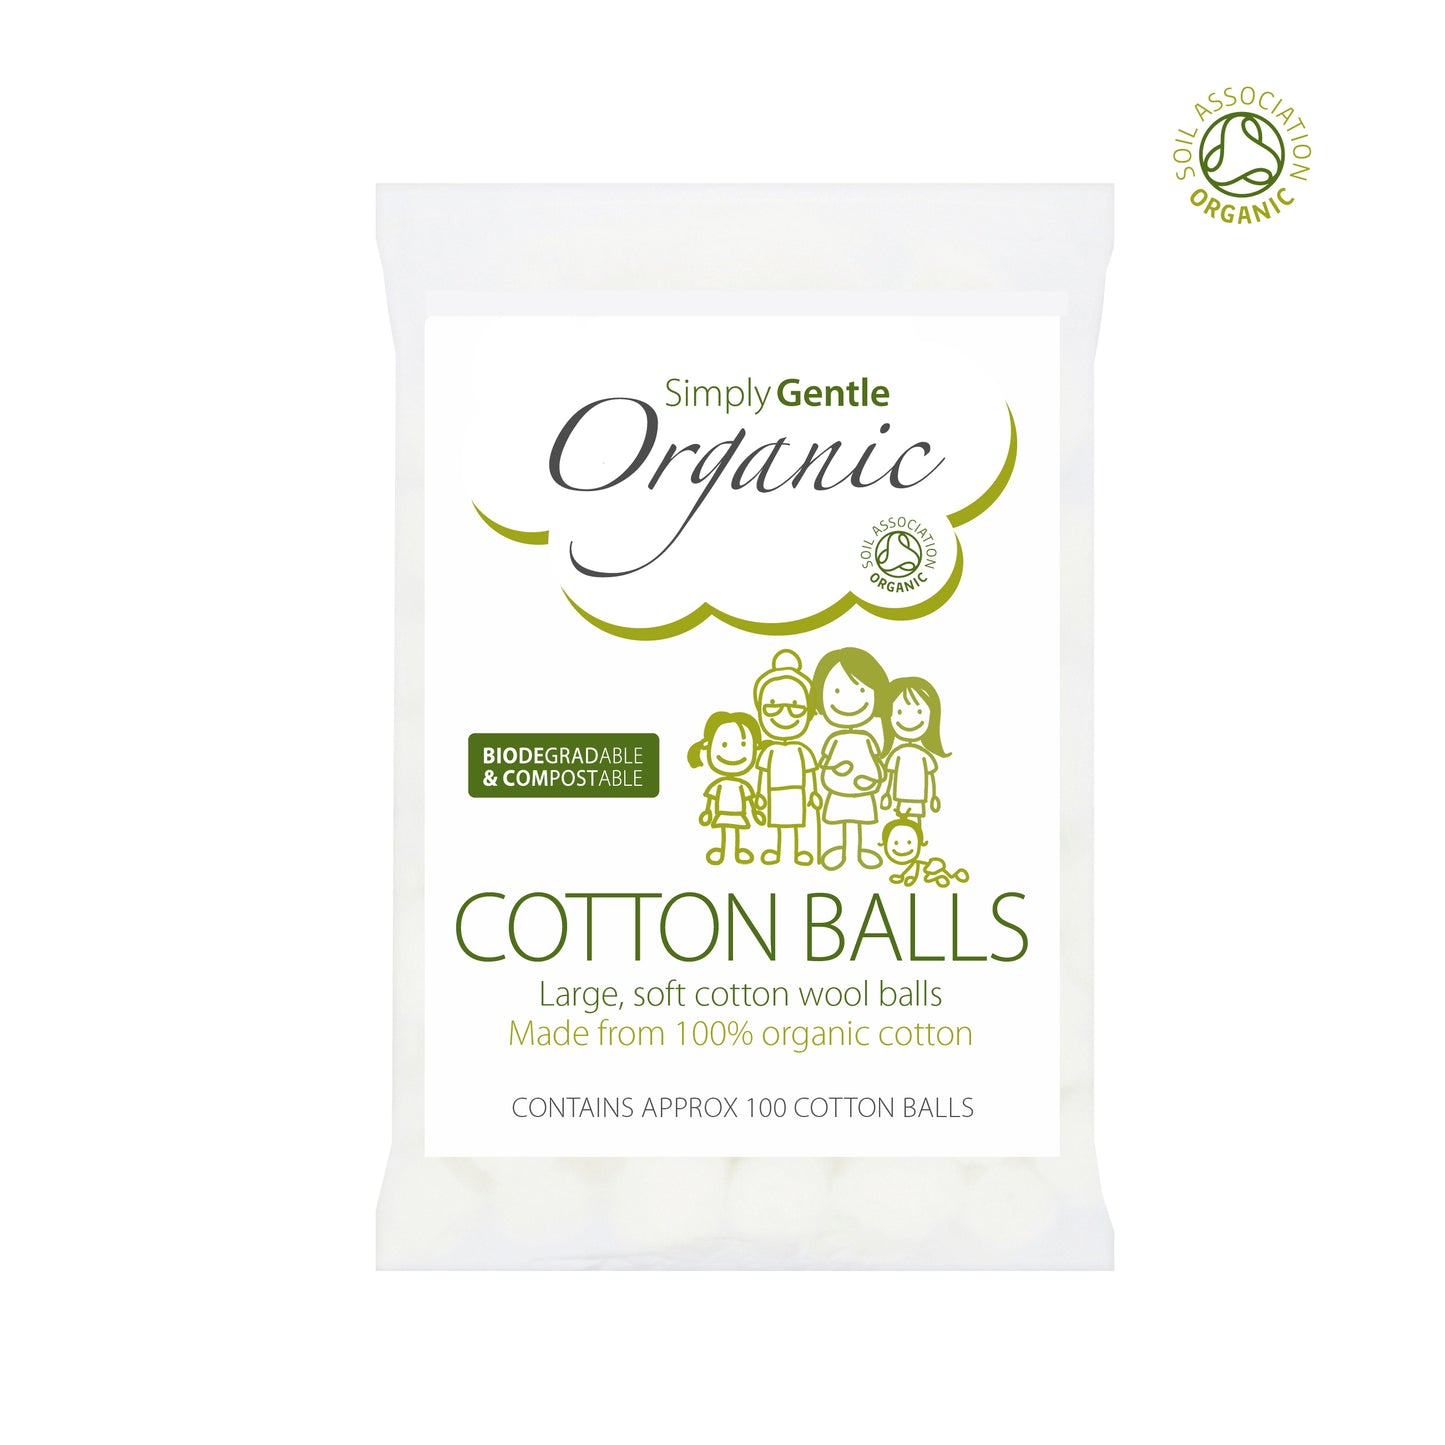 Simple Gentle Organic Cotton Balls are Soil Association approved and are ideal for a wide range of uses, from first aid to beauty routines. Pack Size: 100 Balls.